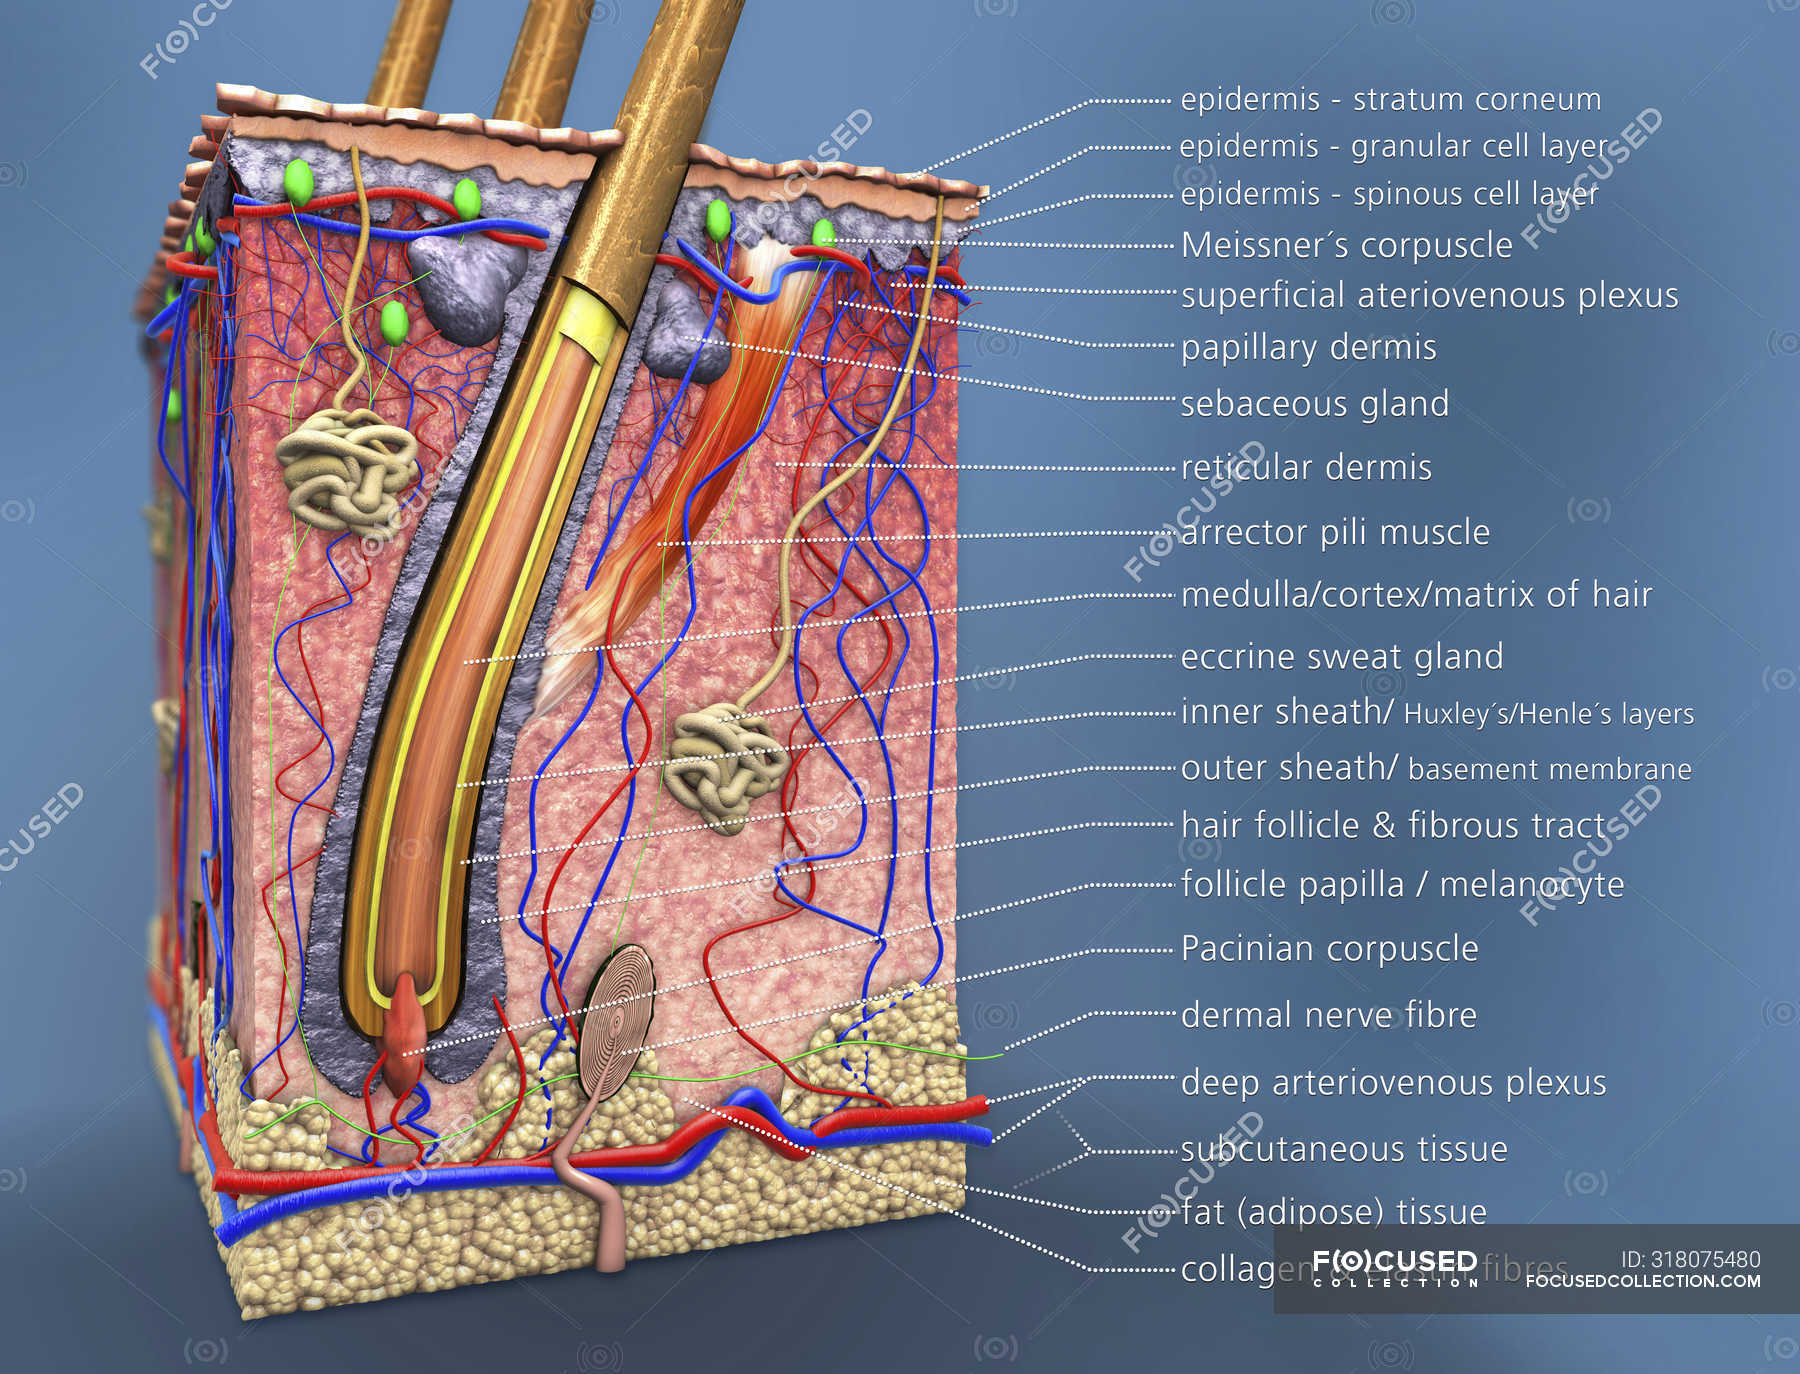 Cross Section Of Human Skin With Hair Follicle Digital Illustration